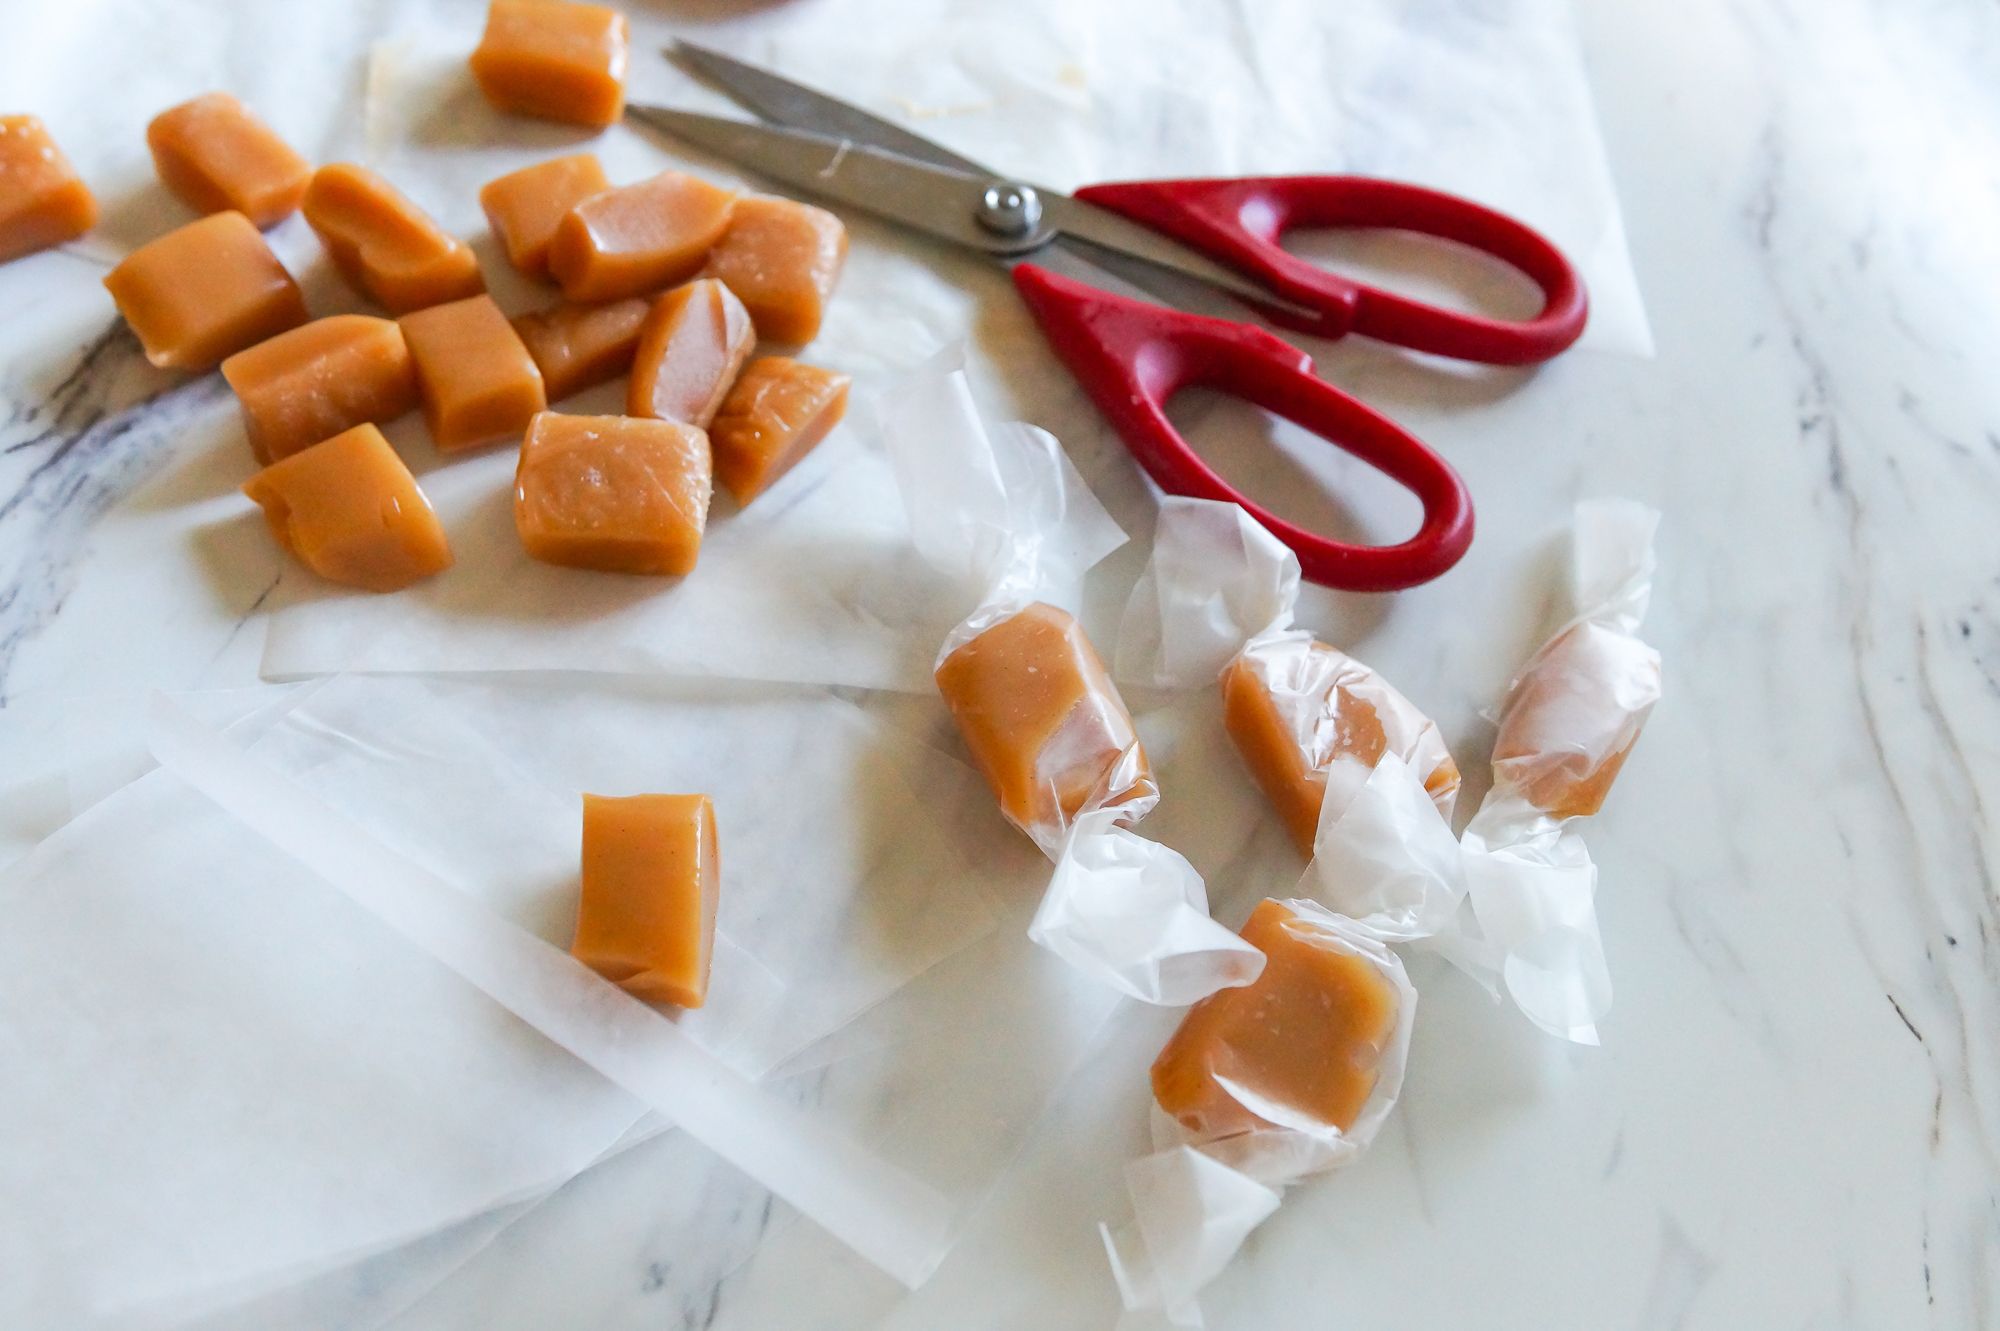 https://hips.hearstapps.com/thepioneerwoman/wp-content/uploads/2018/08/how-to-make-salted-caramels-cut.jpg